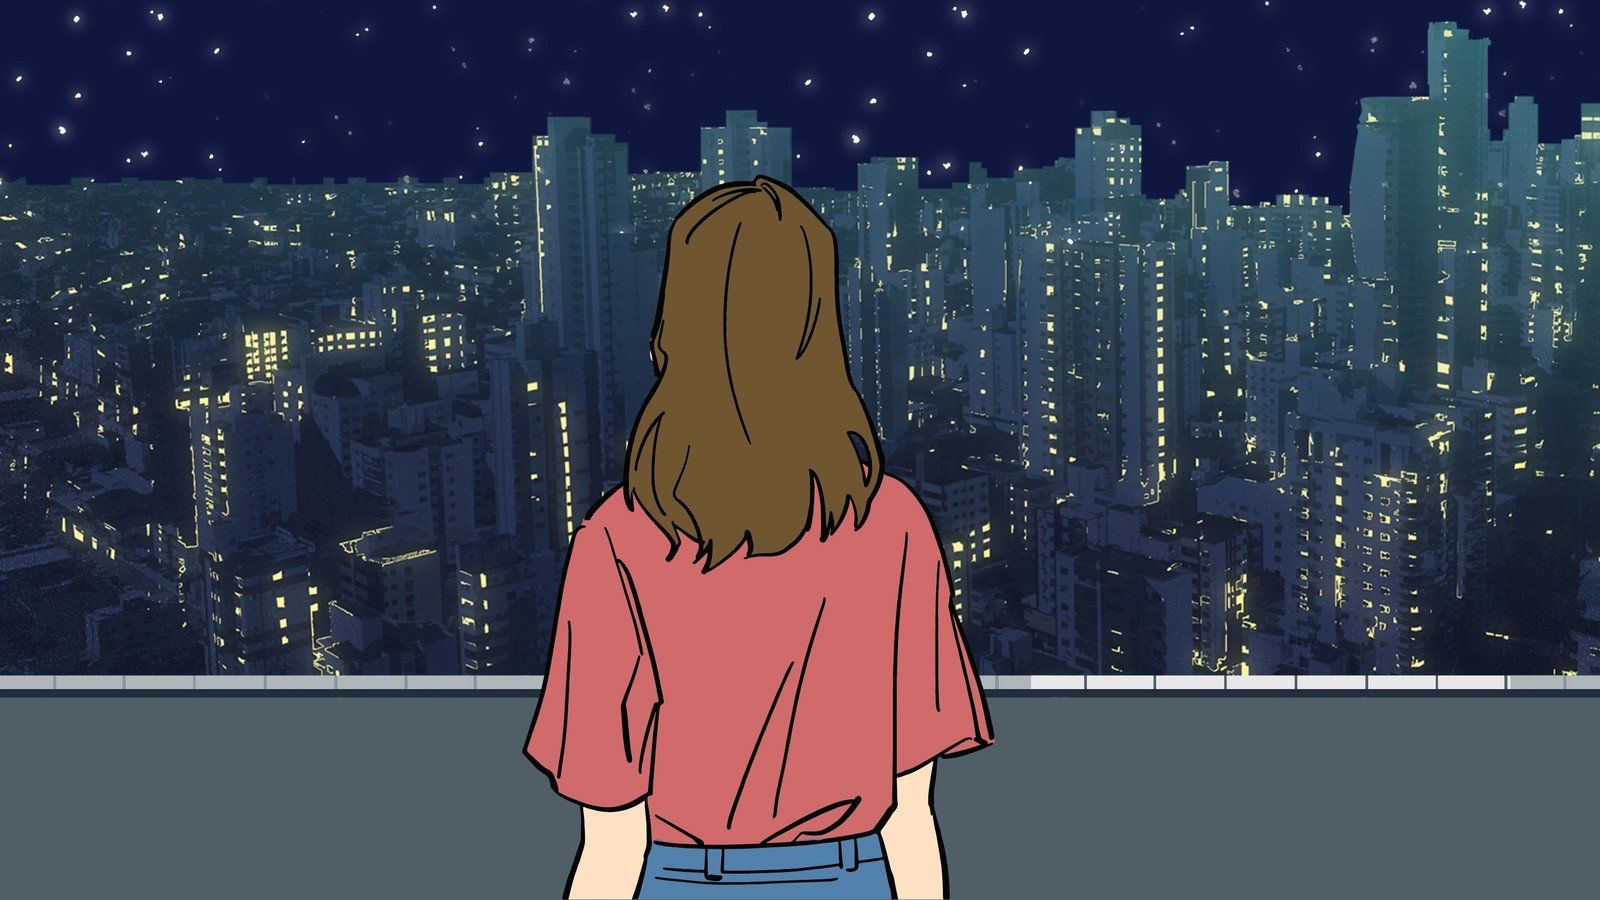 A woman stands on a rooftop looking out at the city at night. - City